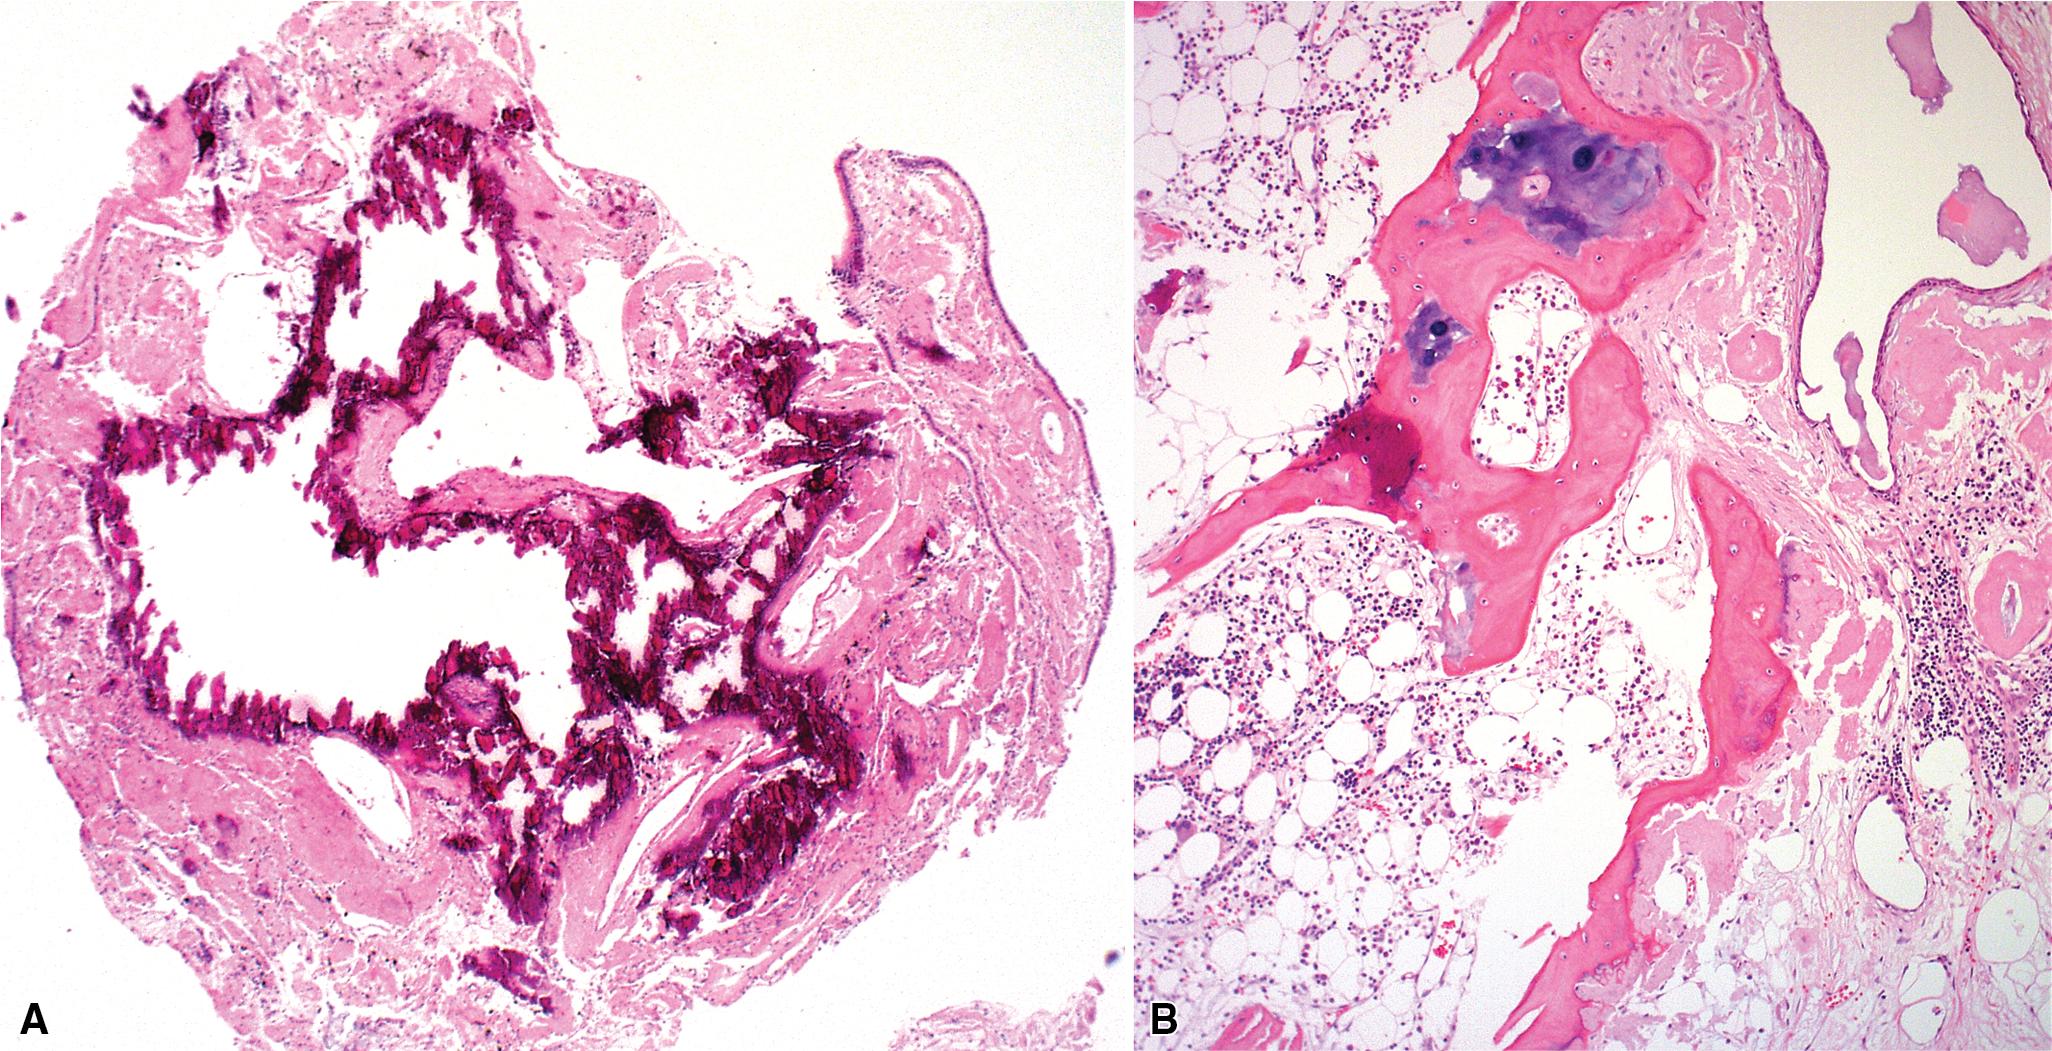 Figure 9.3, Tracheal amyloid. (A) In this tracheal biopsy specimen, the amyloid is diffusely calcified. (B) Osseous metaplasia can occur in tracheal amyloid.